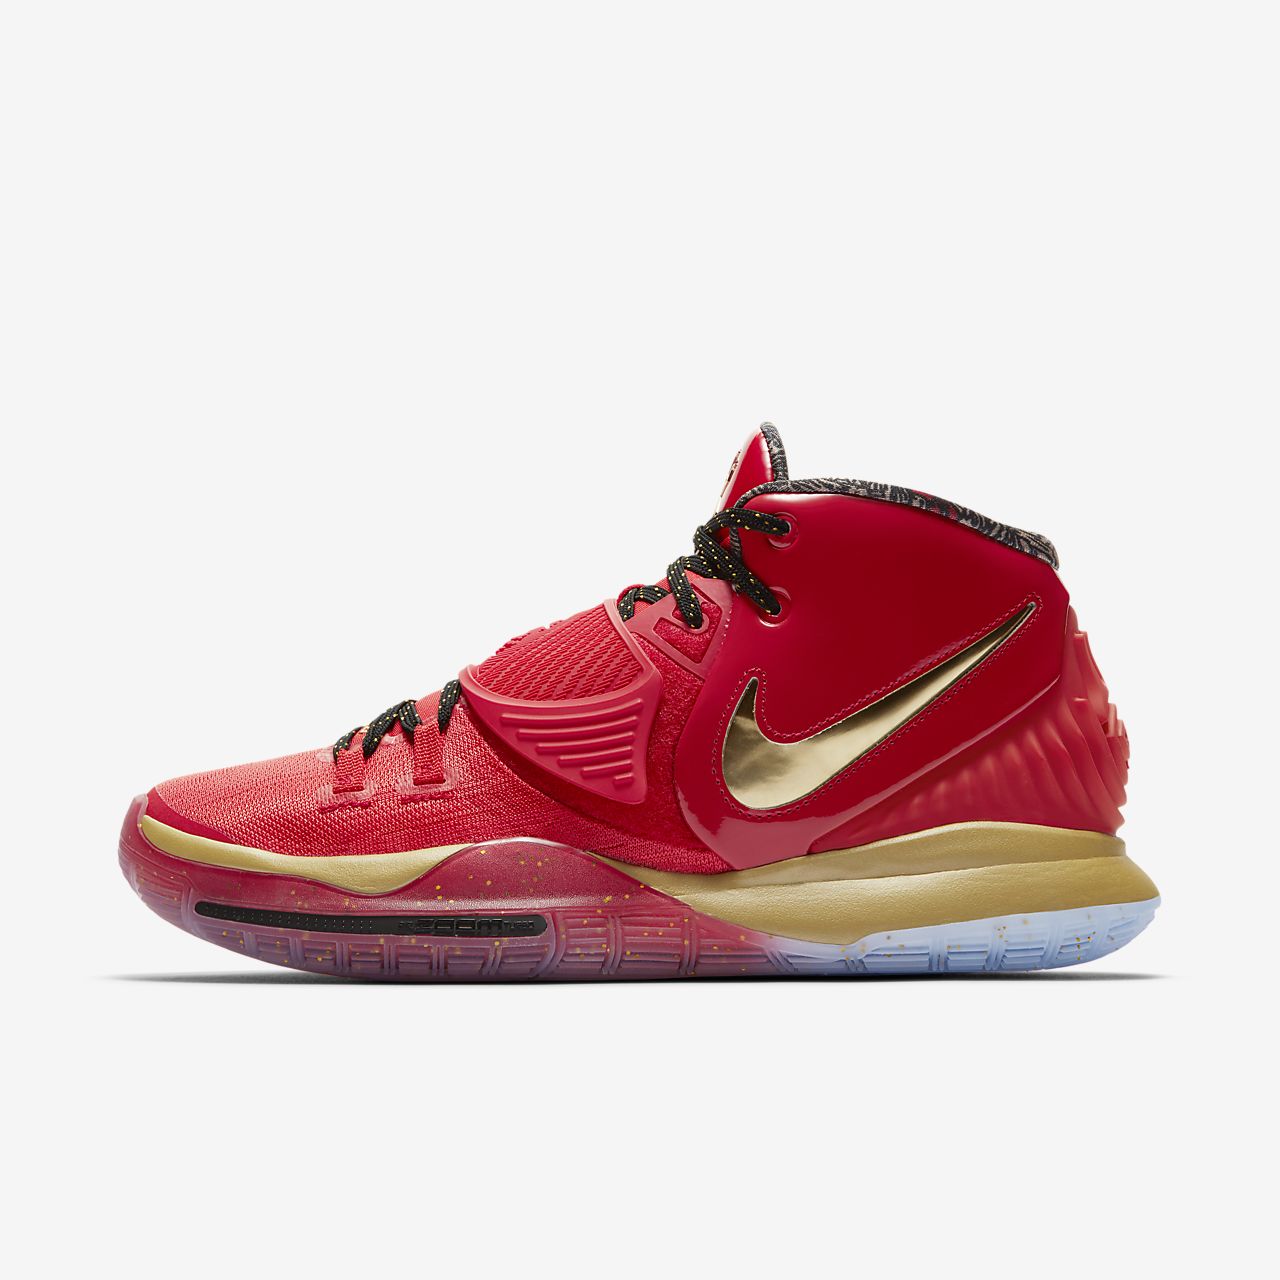 kyrie irving shoes size 9.5 cheap online